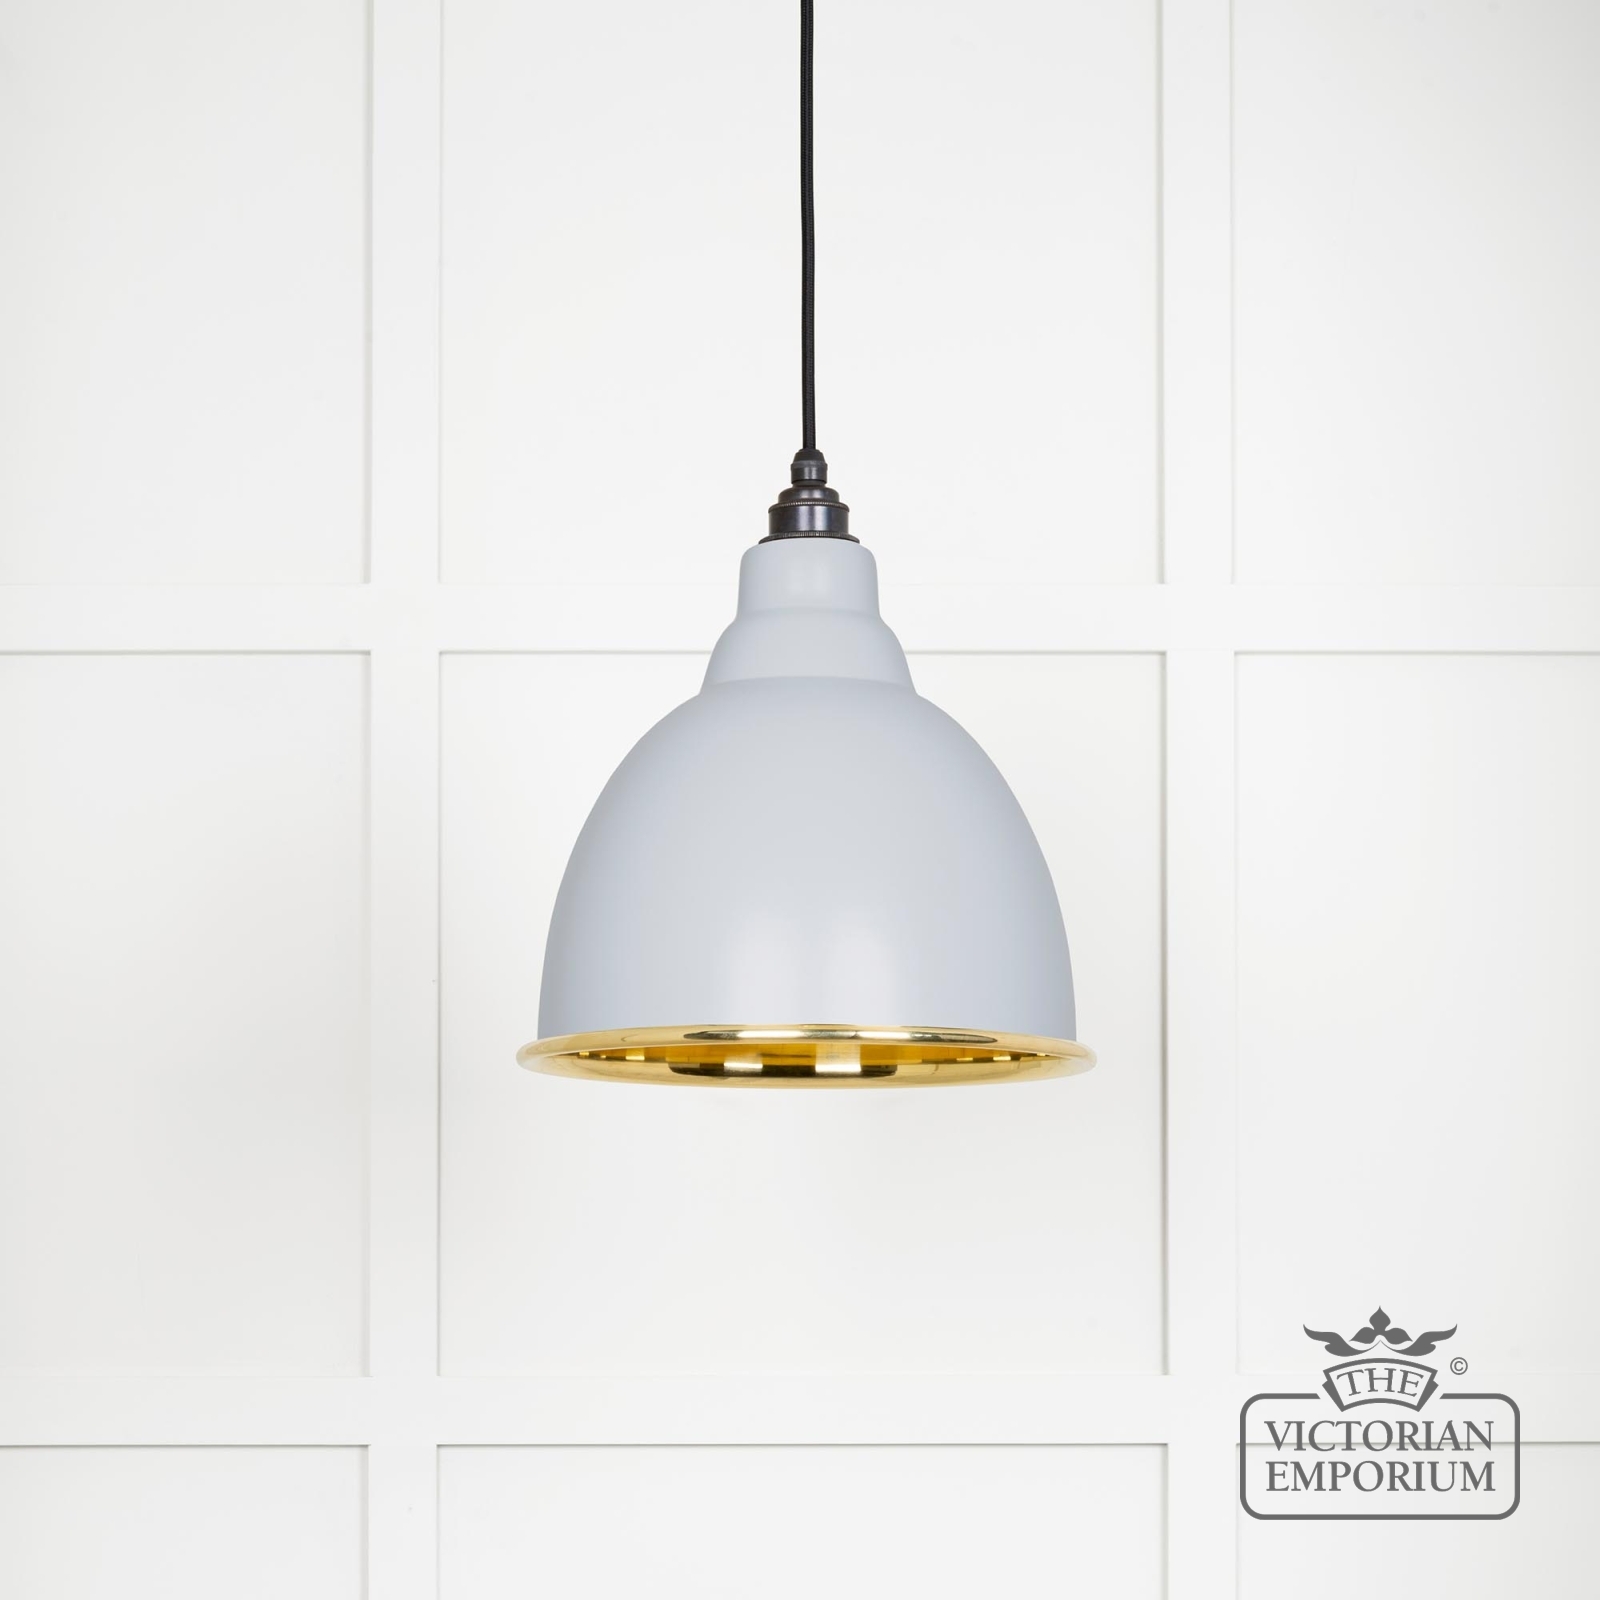 Brindle pendant light in Smooth brass and Birch finish